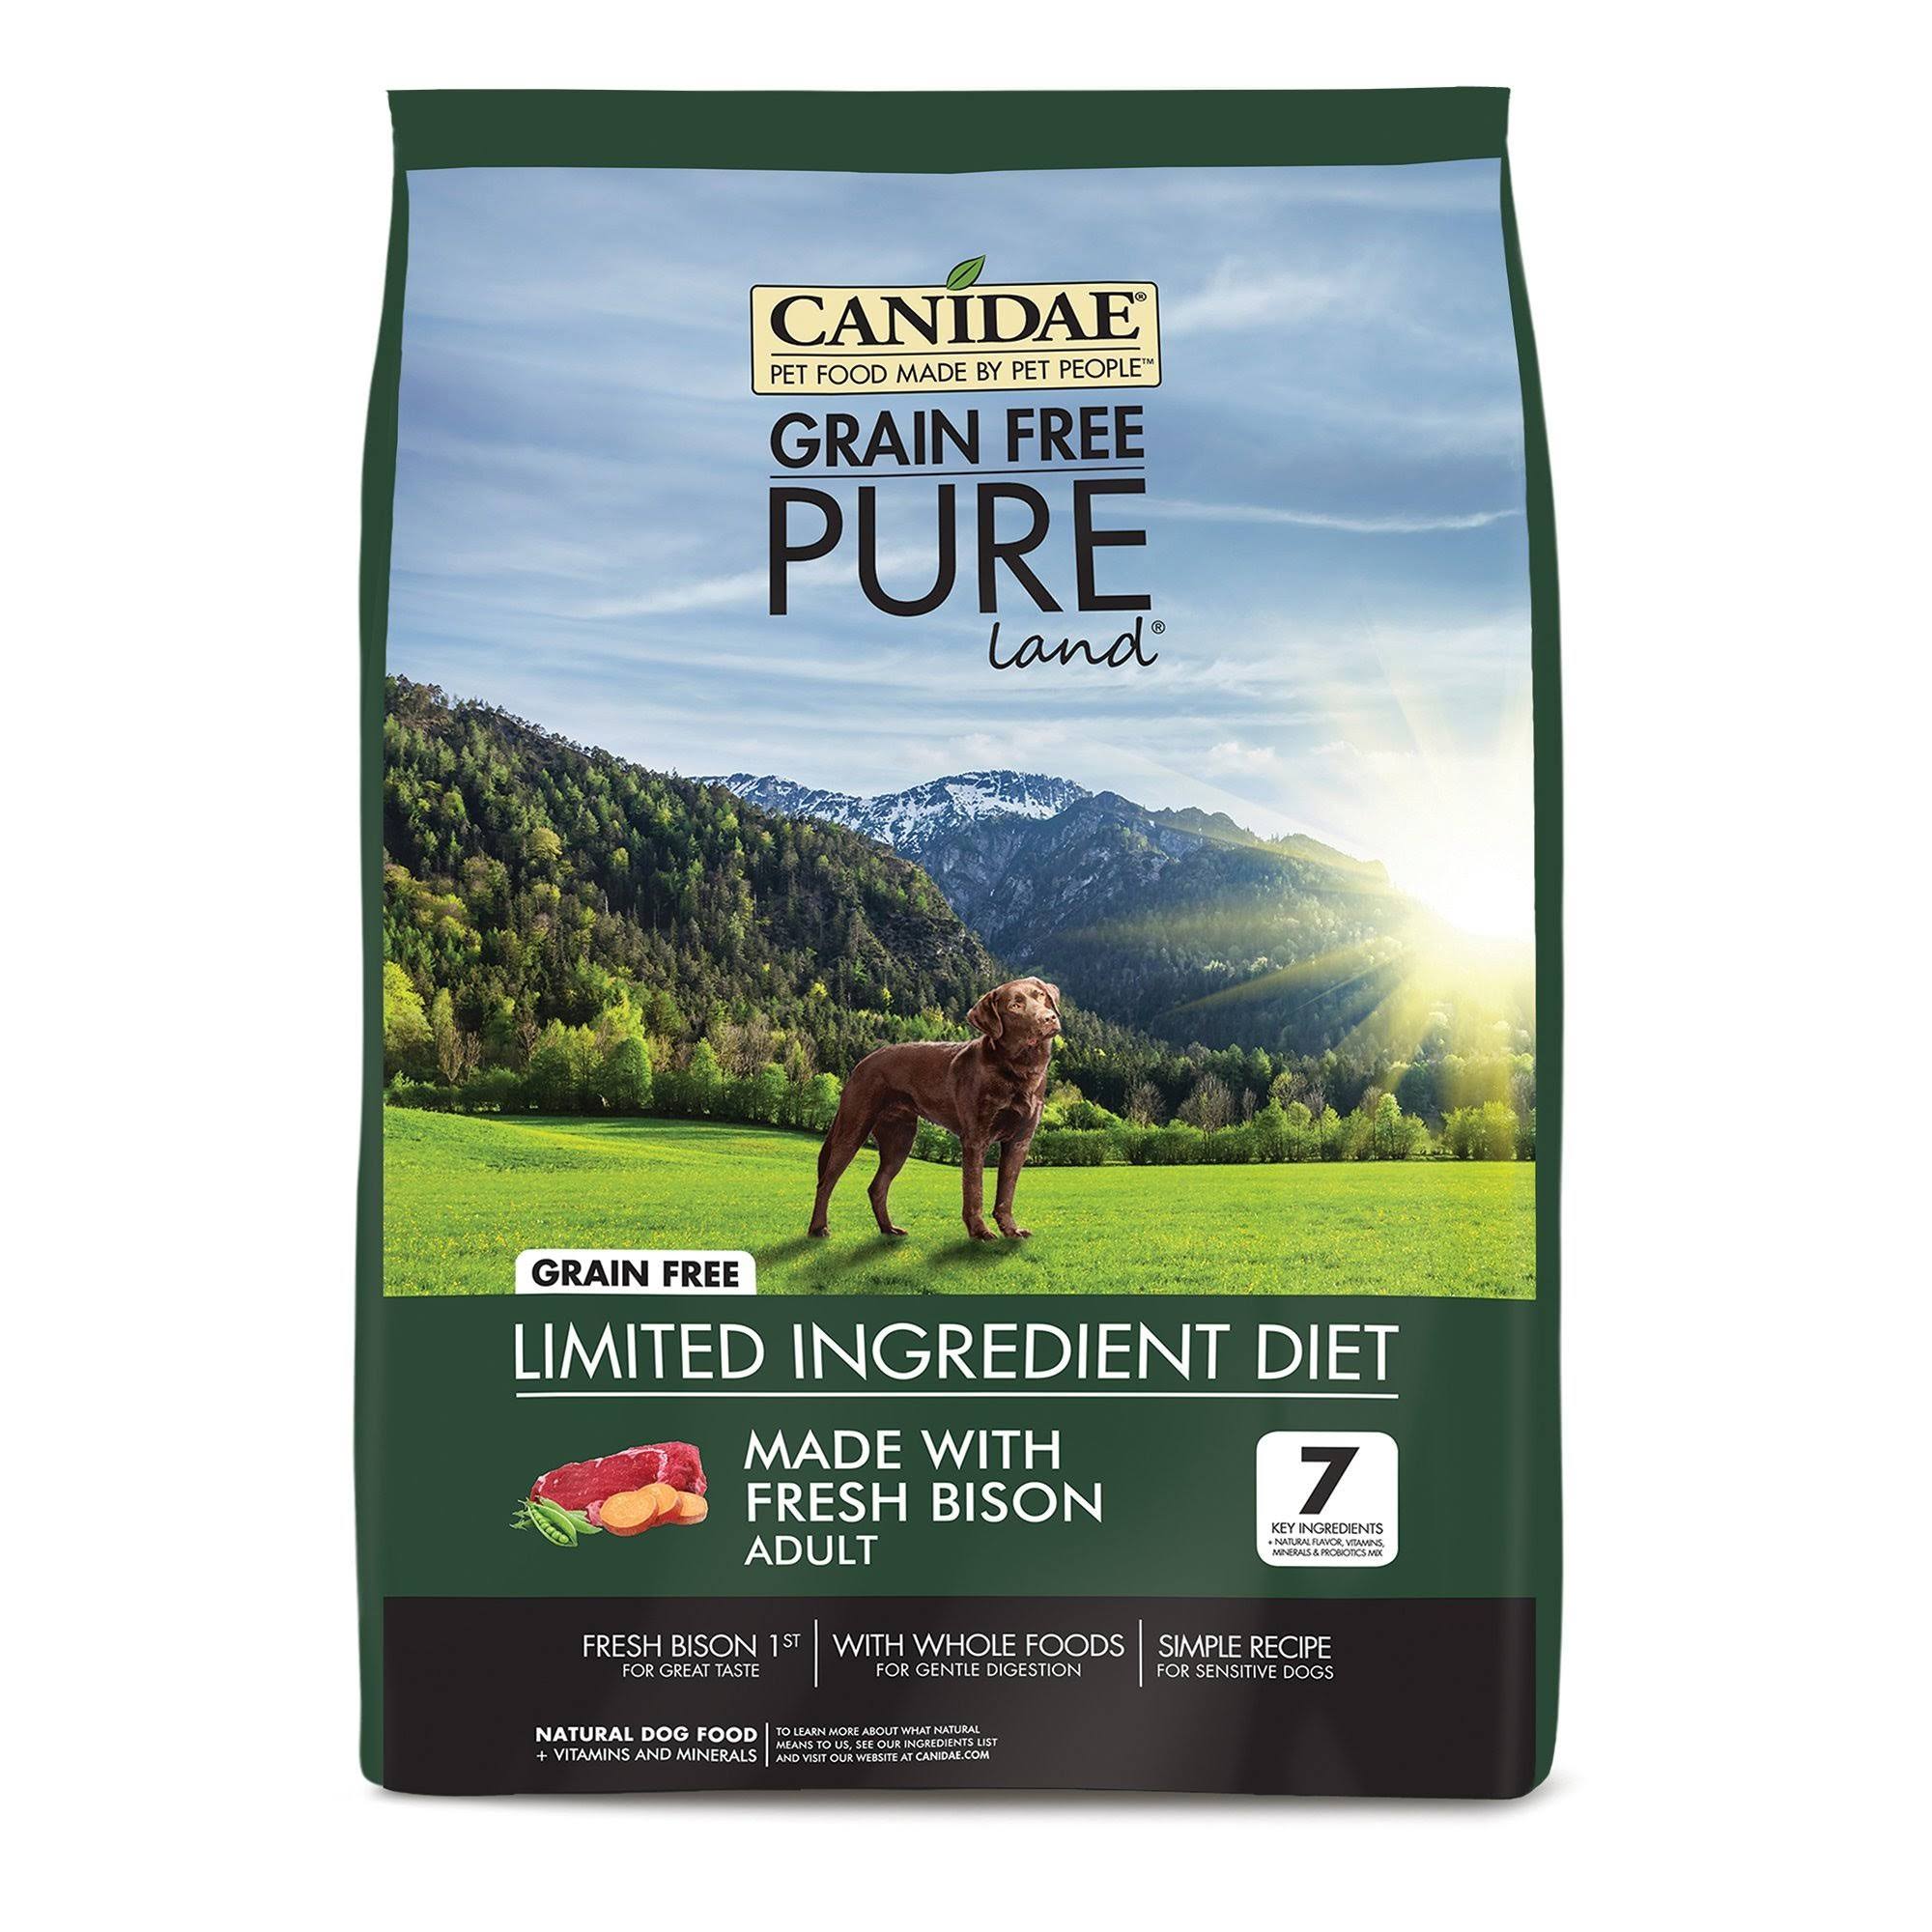 Canidae Grain Free Pure Land Dog Formula - Made with Fresh Bison, Adult, 12lbs